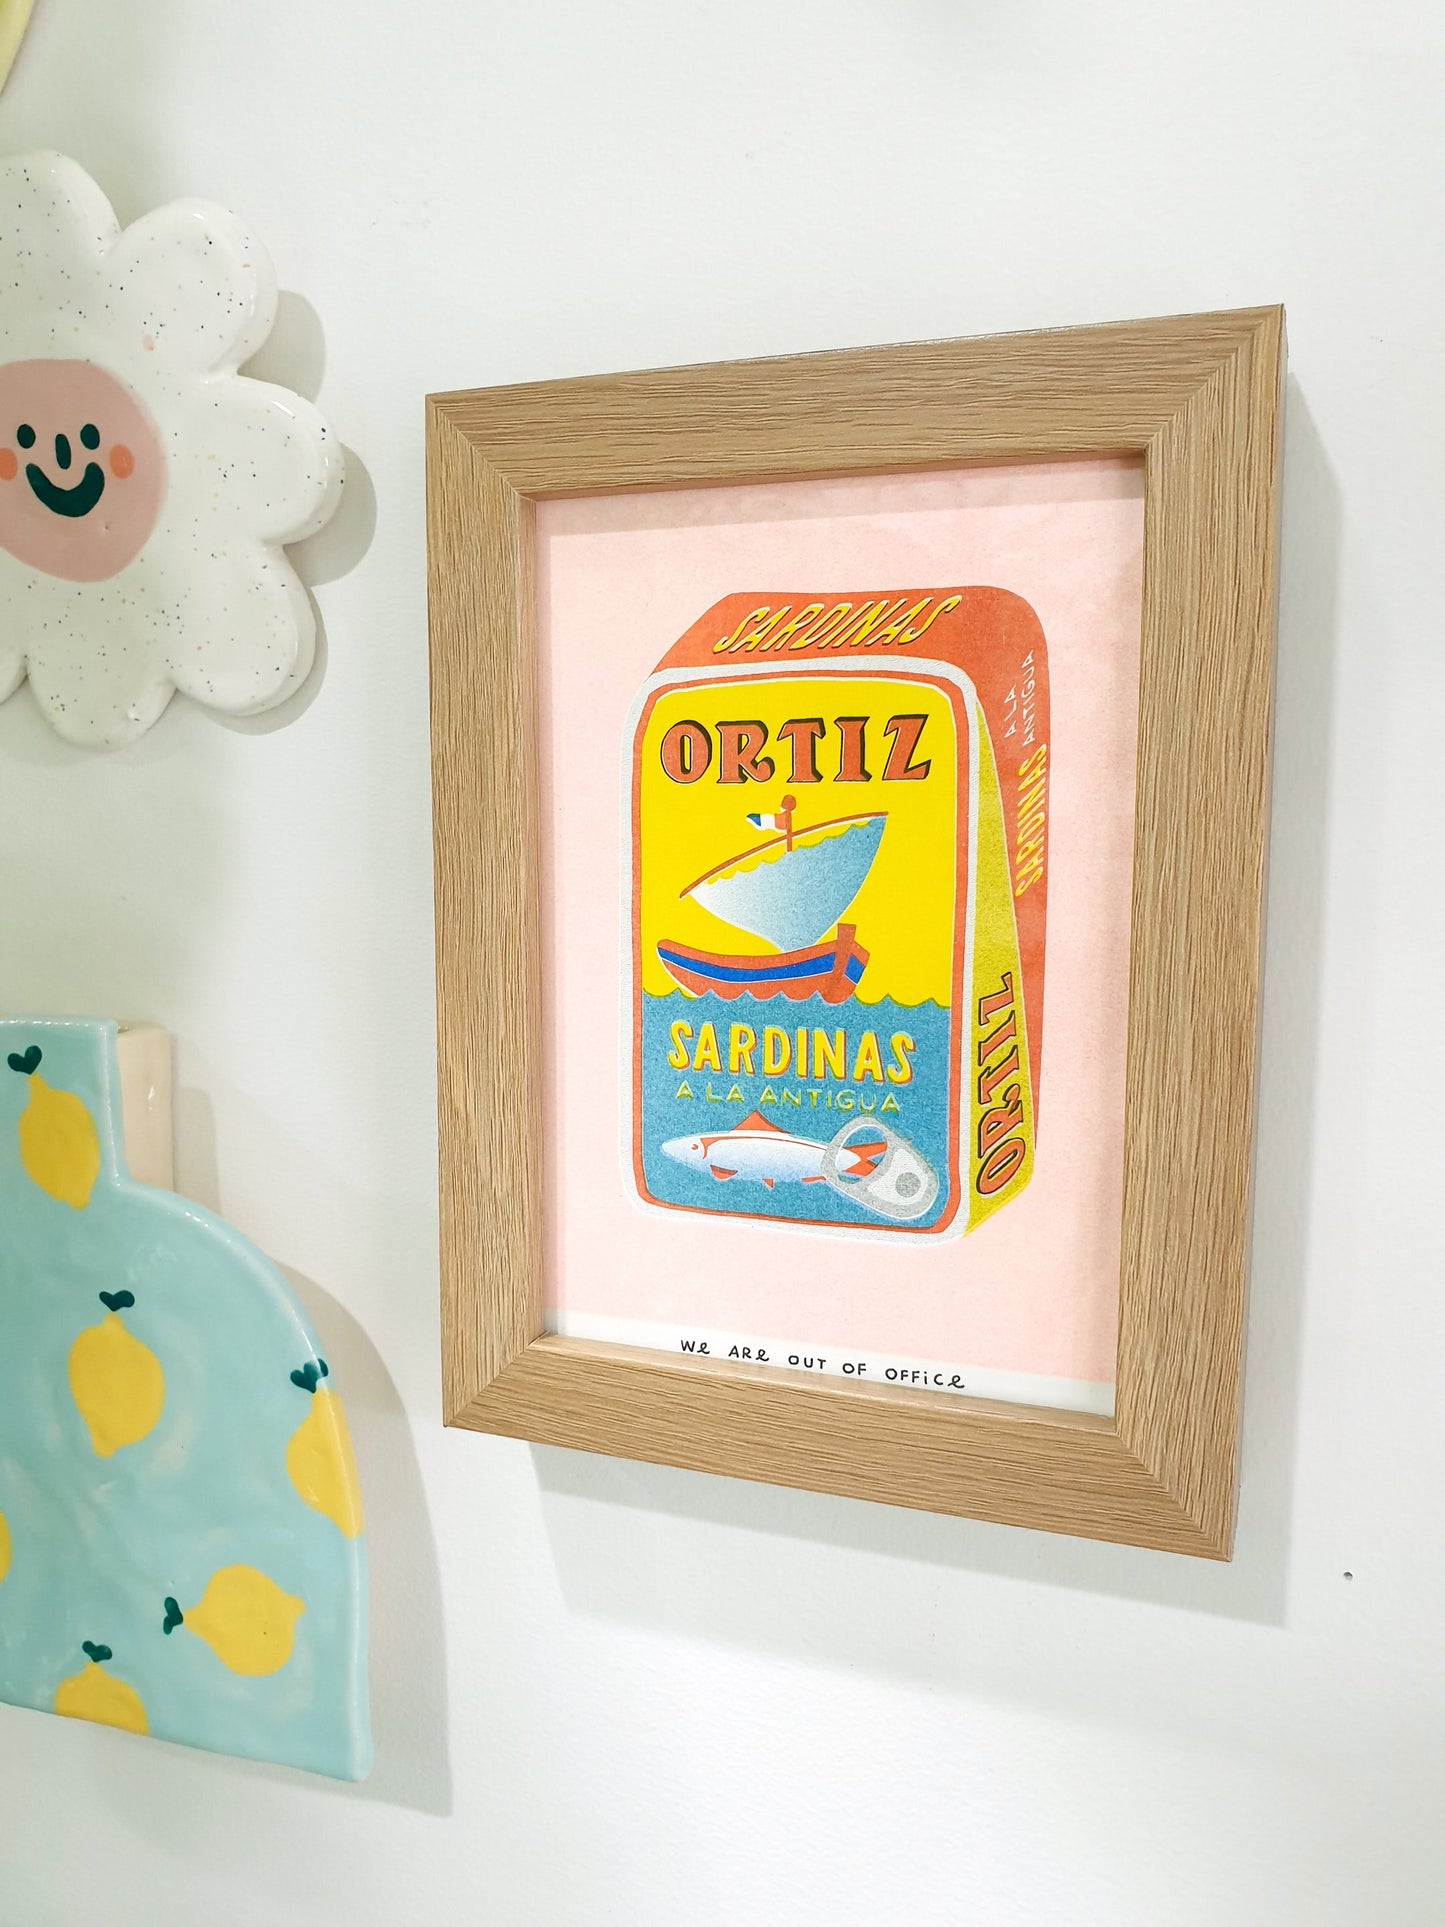 'A can full of sardines' - A framed risograph print by 'We are out of office'